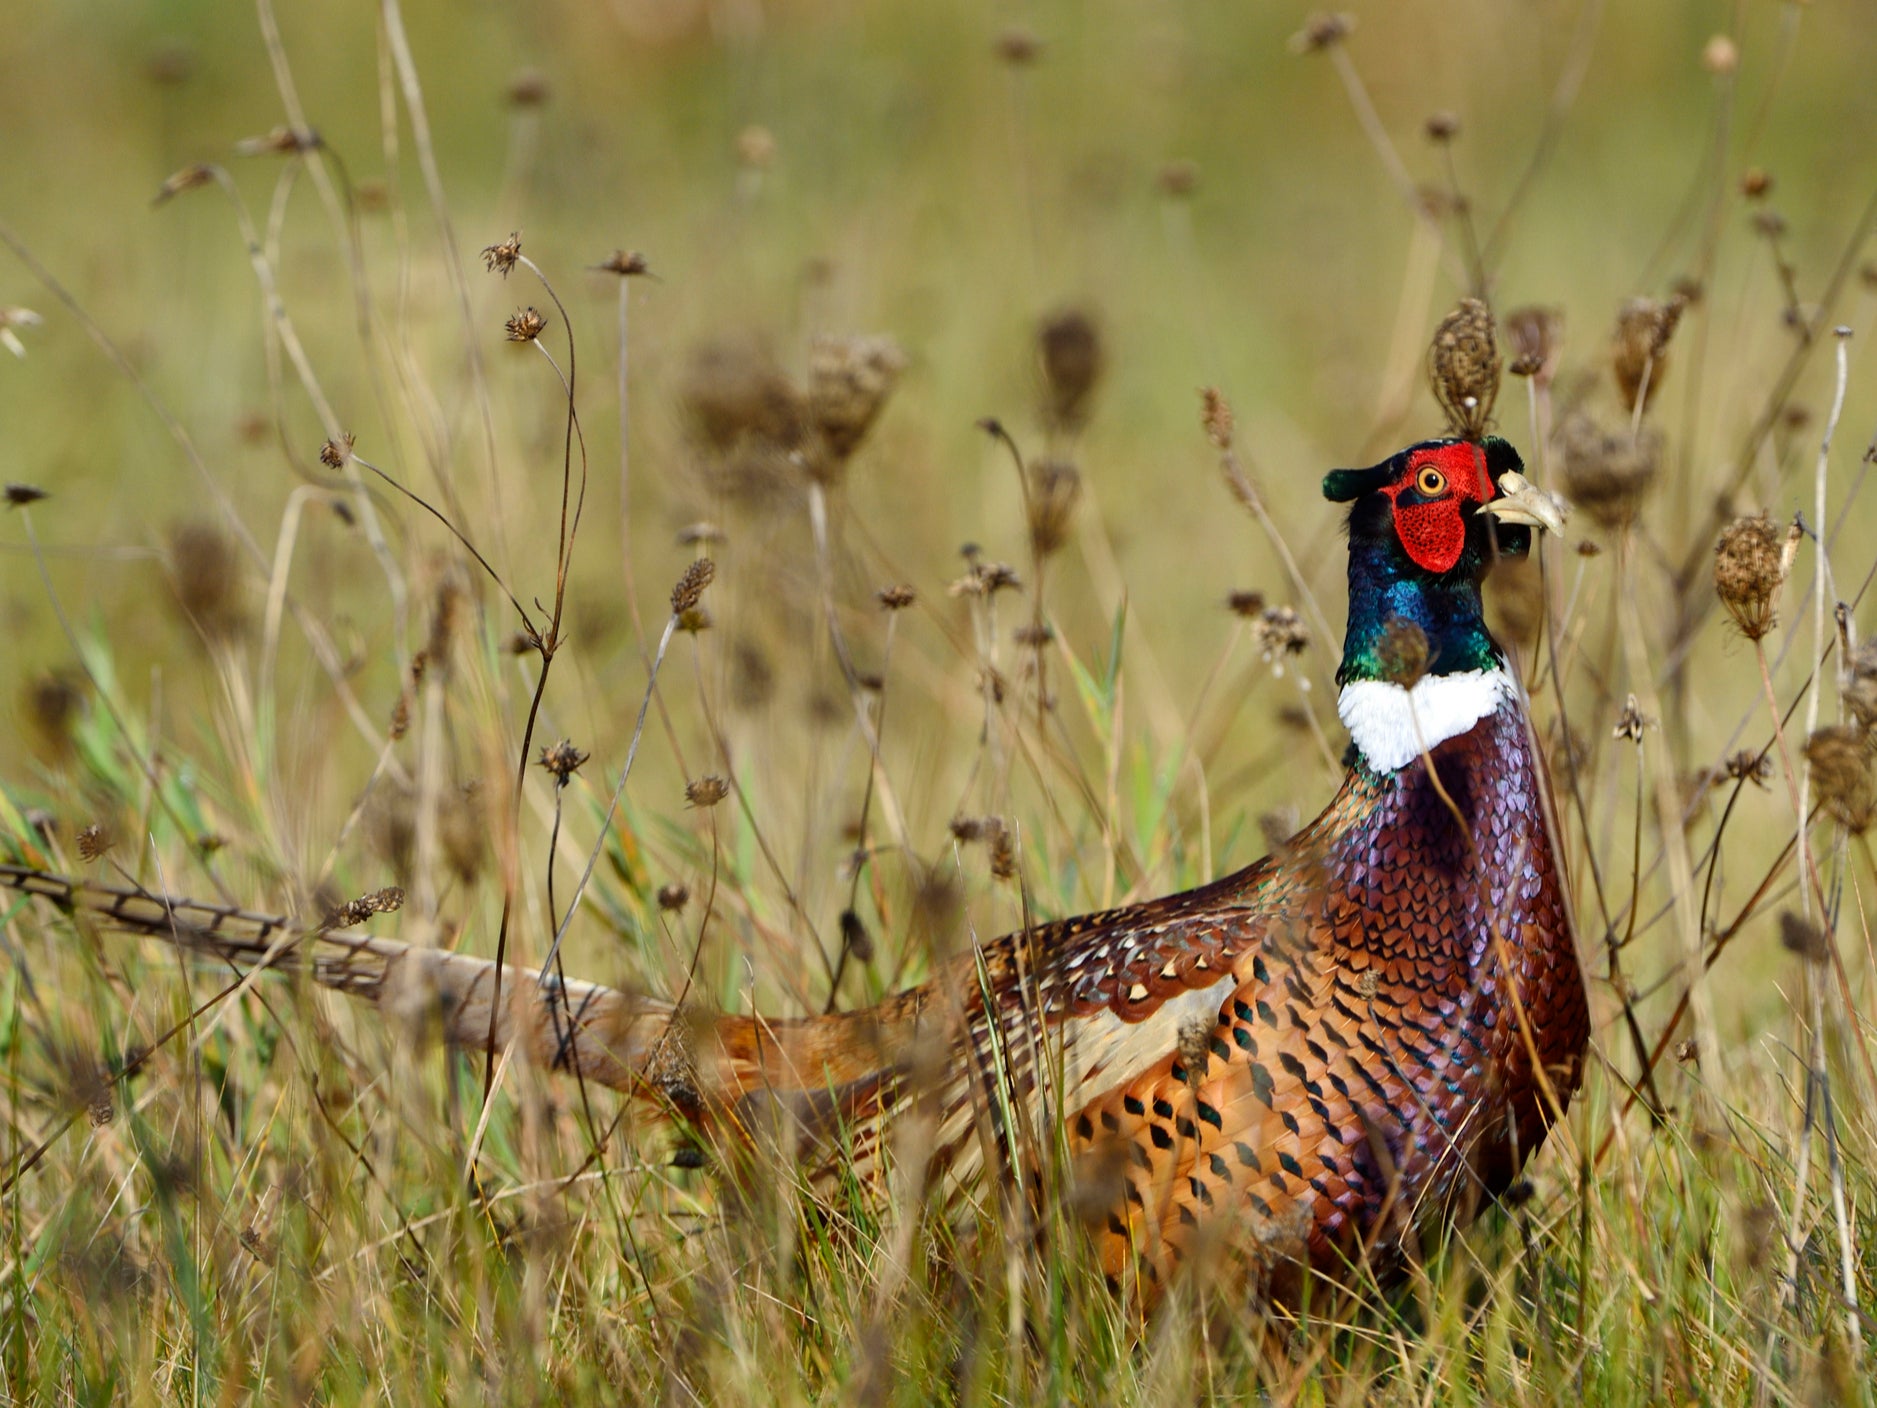 Around 11,000 tonnes of meat from wild-shot gamebirds, mostly pheasant, are eaten in the UK every year